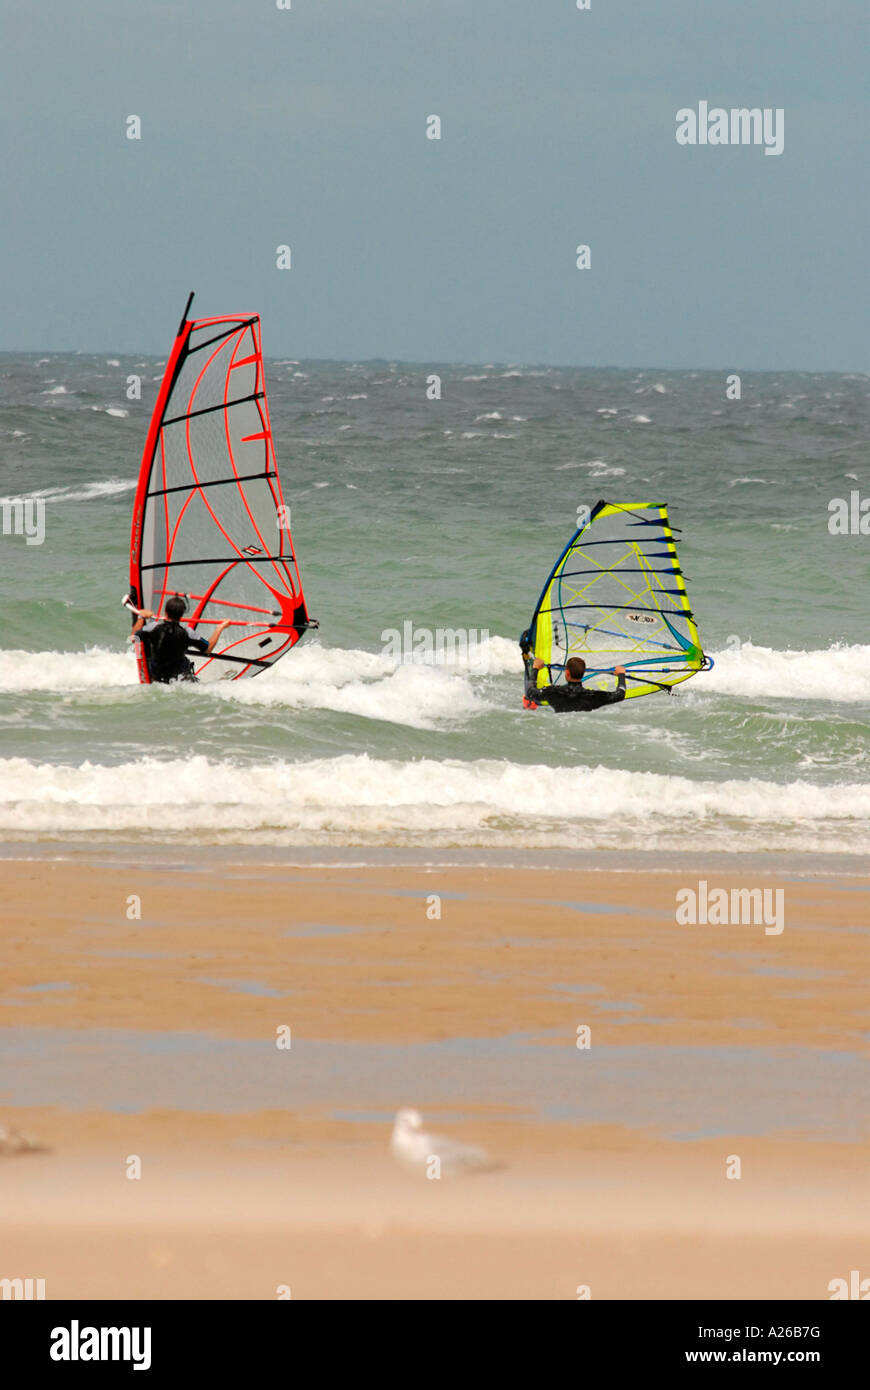 Wind surfers at Sandgatte, just south of Calais on the B904 Calais / Boulogne coastal road Northern France Stock Photo